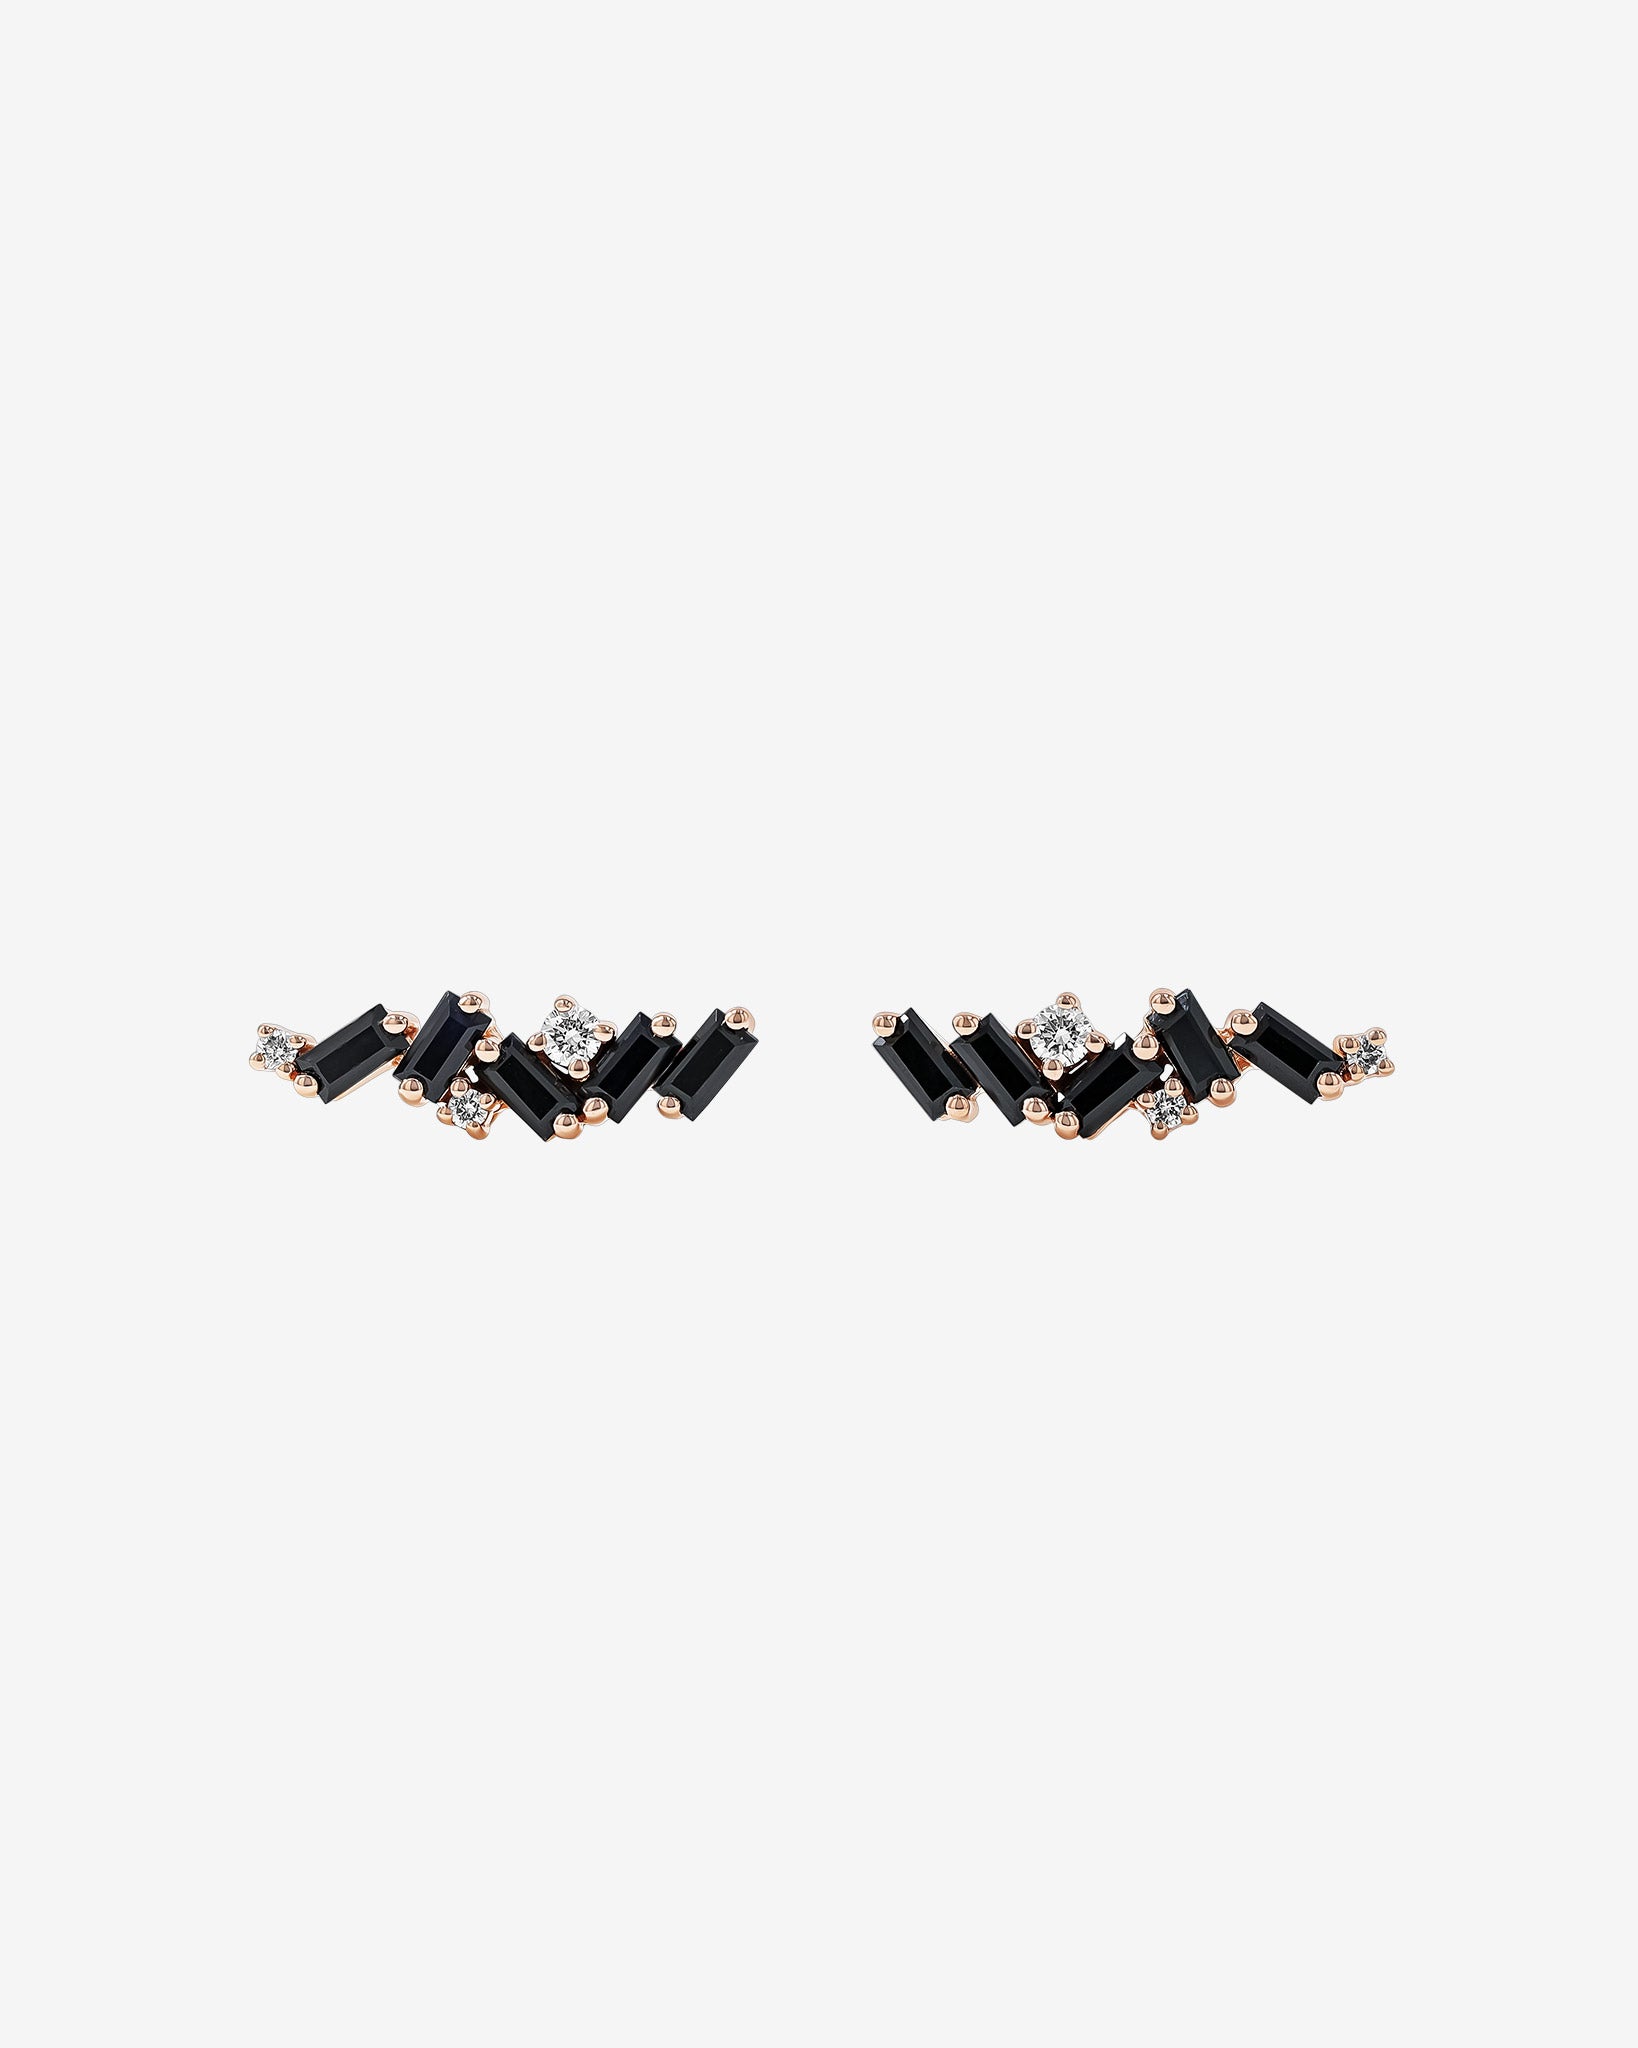 Suzanne Kalan Frenzy Black Sapphire Studs in 18k rose gold